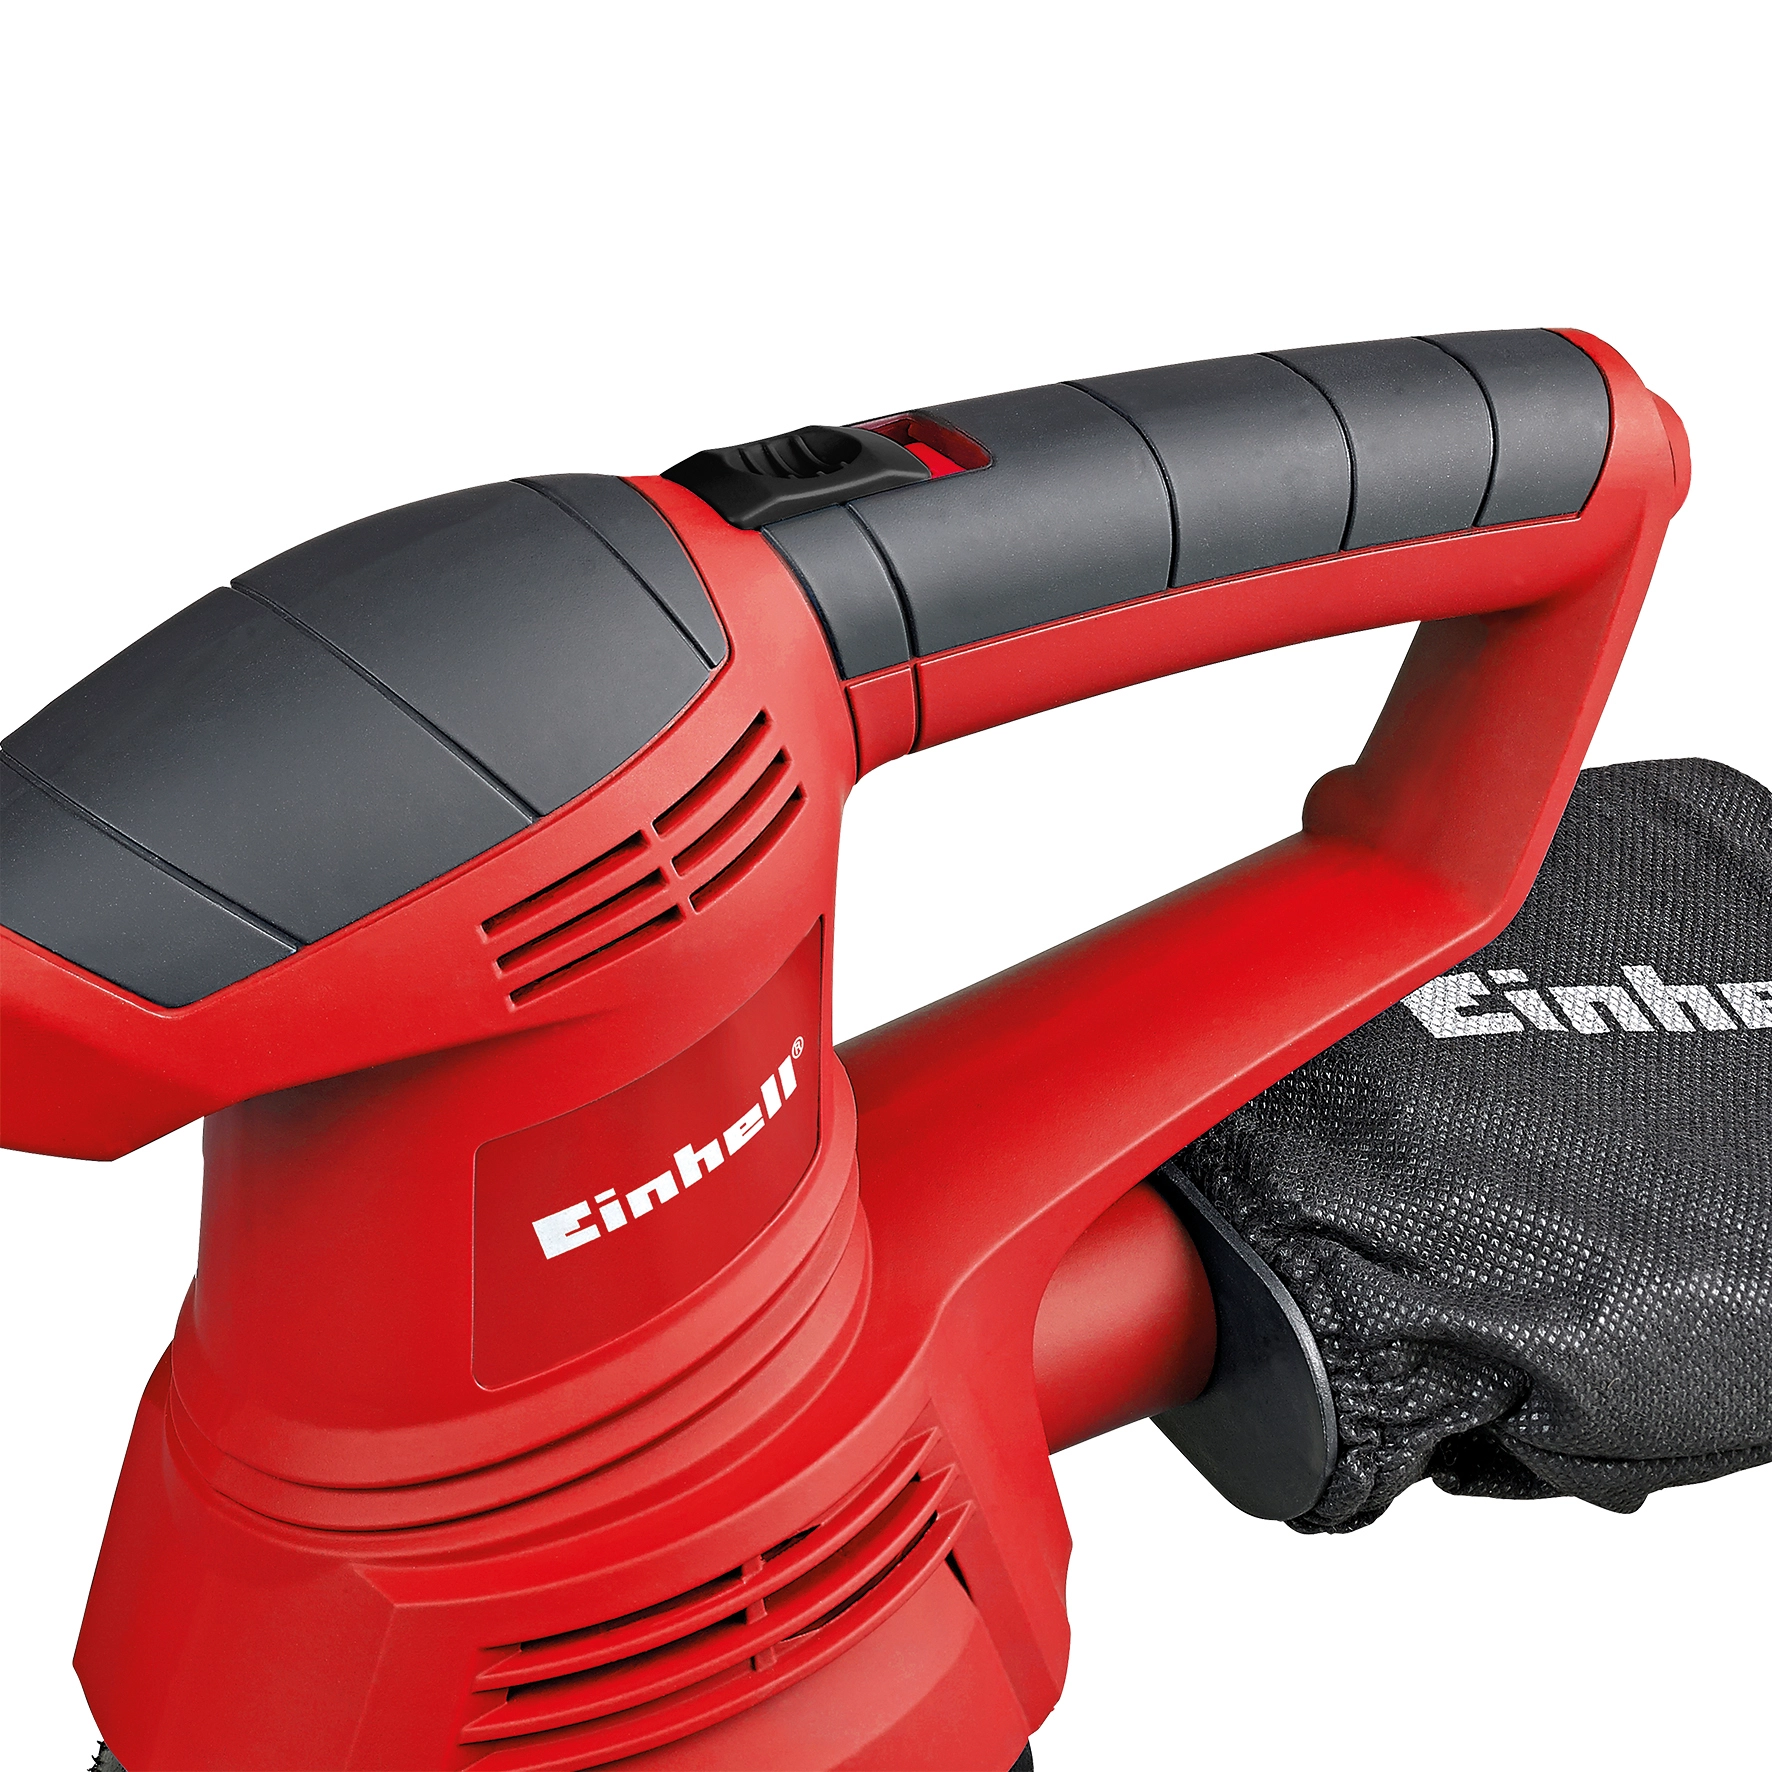 Einhell Ponceuse triangulaire TC-DS 19